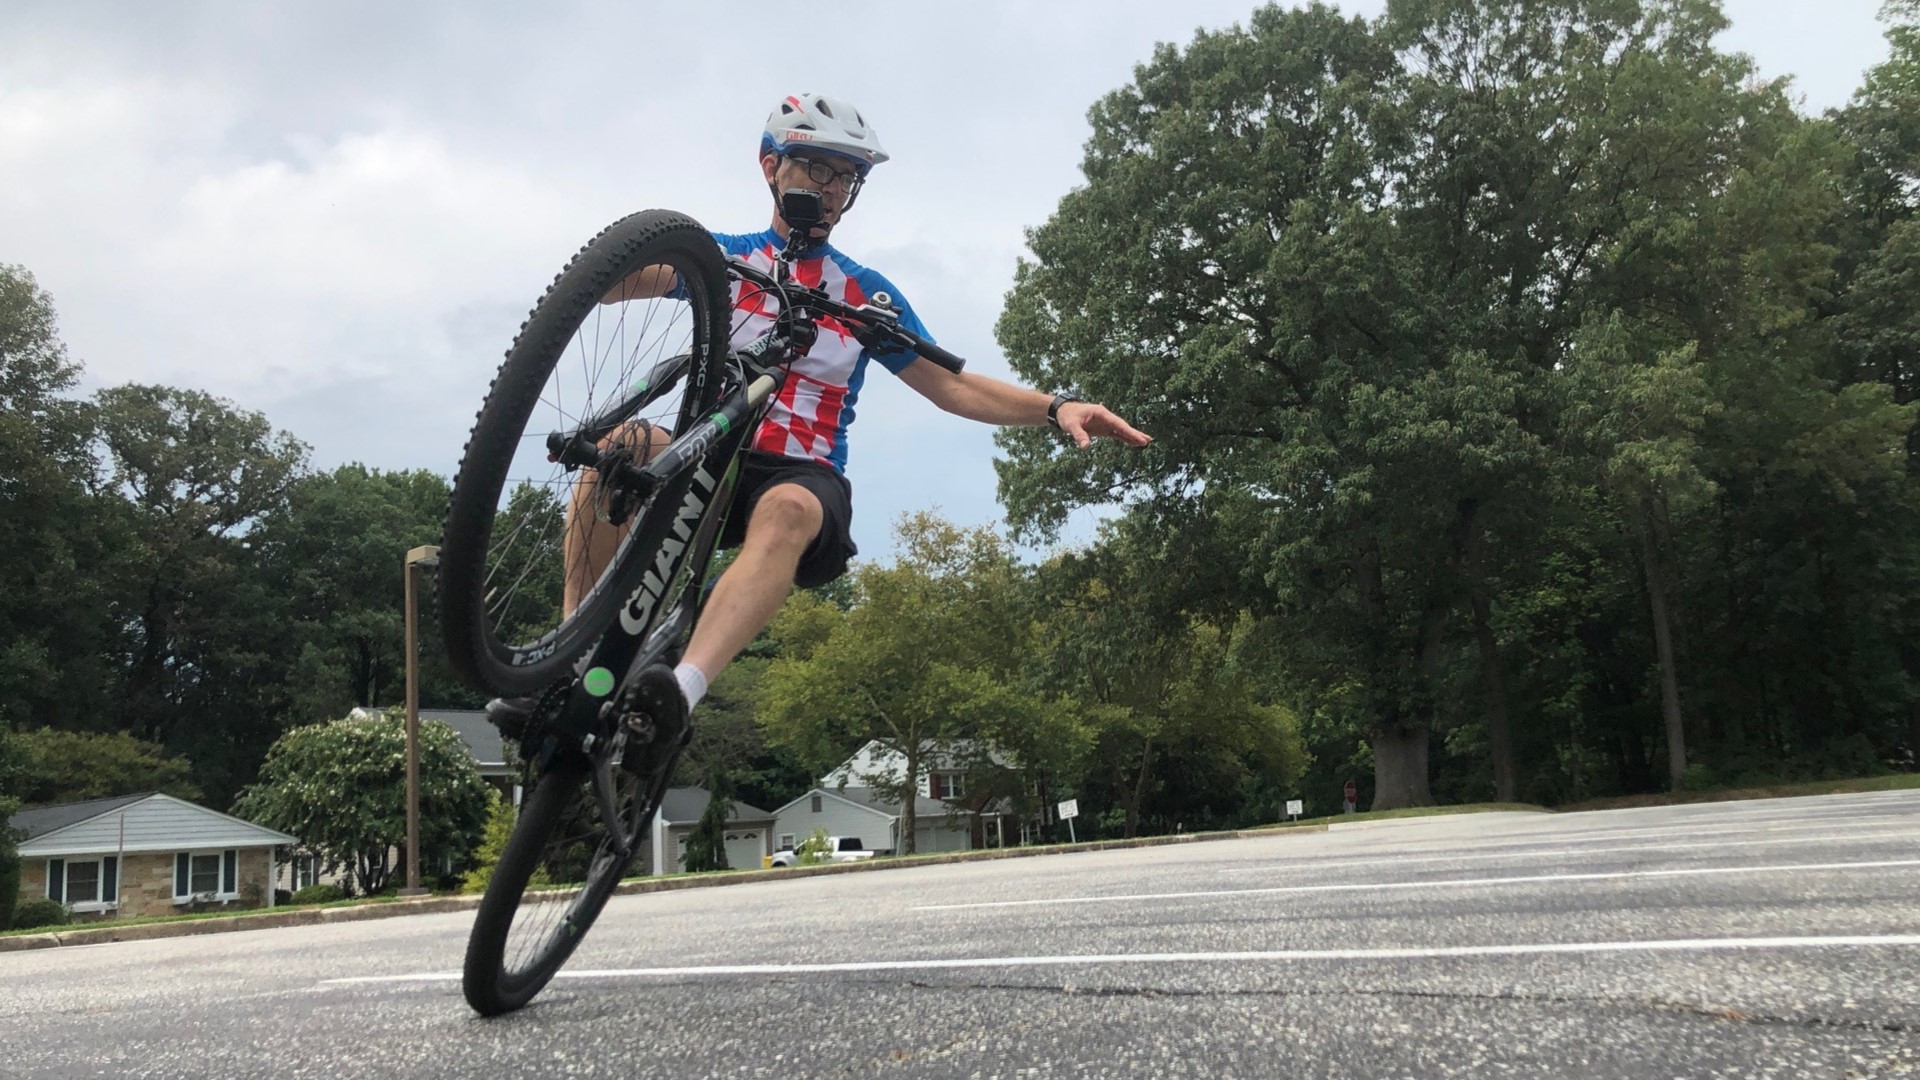 Rich Flanagan is a two time wheelie riding Guinness World recorder holder. Flanagan, the 56 year old grandfather of 3, father of 5, was born in Bowie but now lives in Crofton, MD. In 2016 and 2017 respectively, he set the records for the farthest distance bicycle wheelie in one hour (16.07 miles) and the fastest bicycle wheelie over 100 meters (10.86 seconds). He's training for his 1st attempt at a 3rd Guinness World record: the longest ever wheelie on a bike.